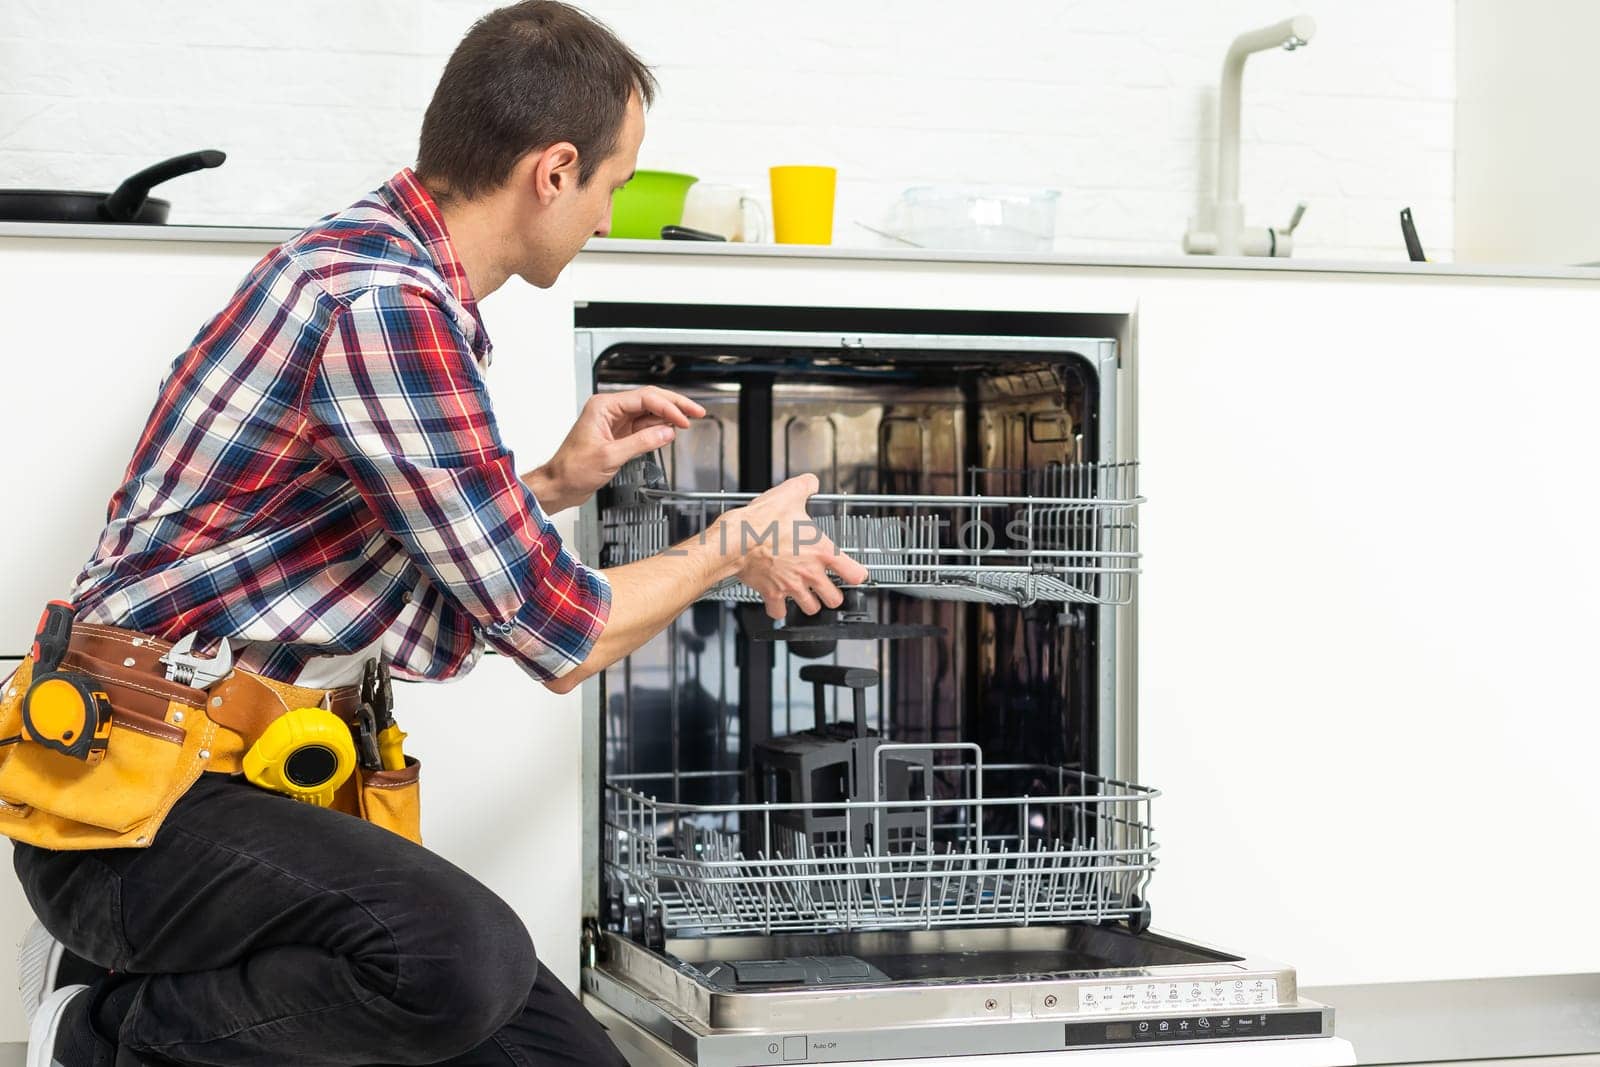 Man repairing a dishwasher with tools by Andelov13